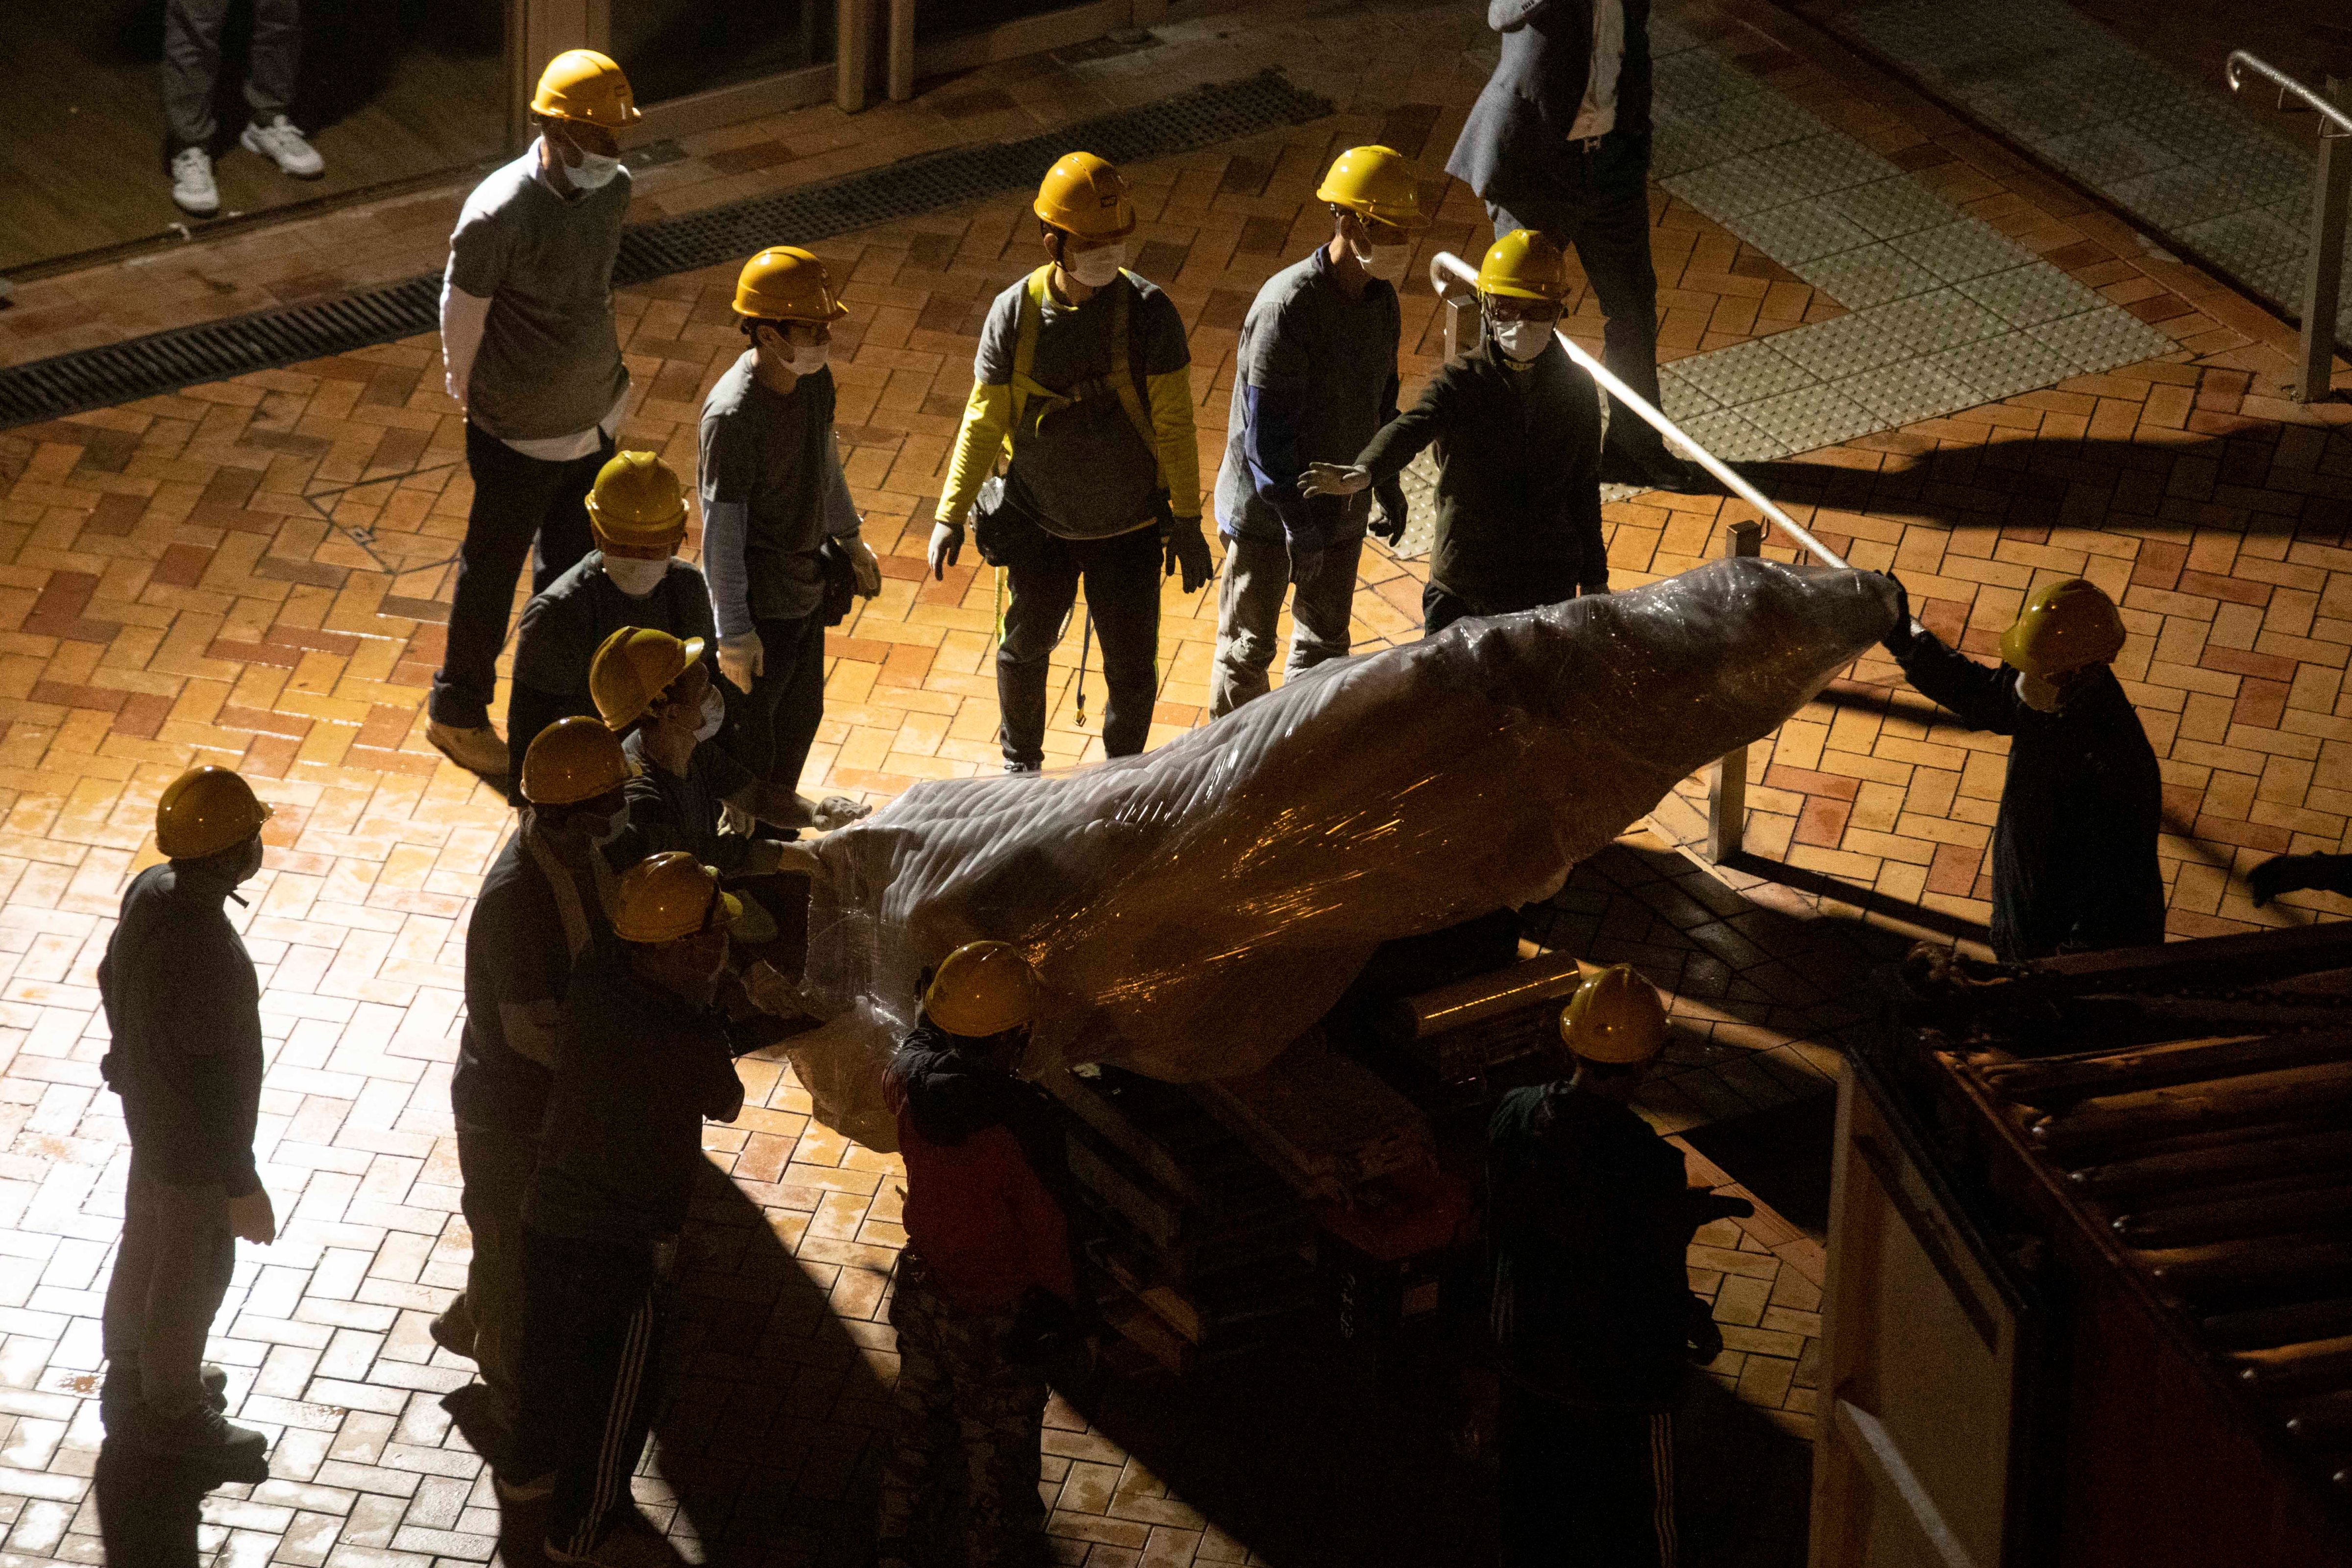 The "Pillar of Shame" statue, a memorial for those killed in the 1989 Tiananmen crackdown, is removed from the University of Hong Kong on Thursday, Dec. 23, 2021. (Lam Chun Tung–The Initium Media/AP)